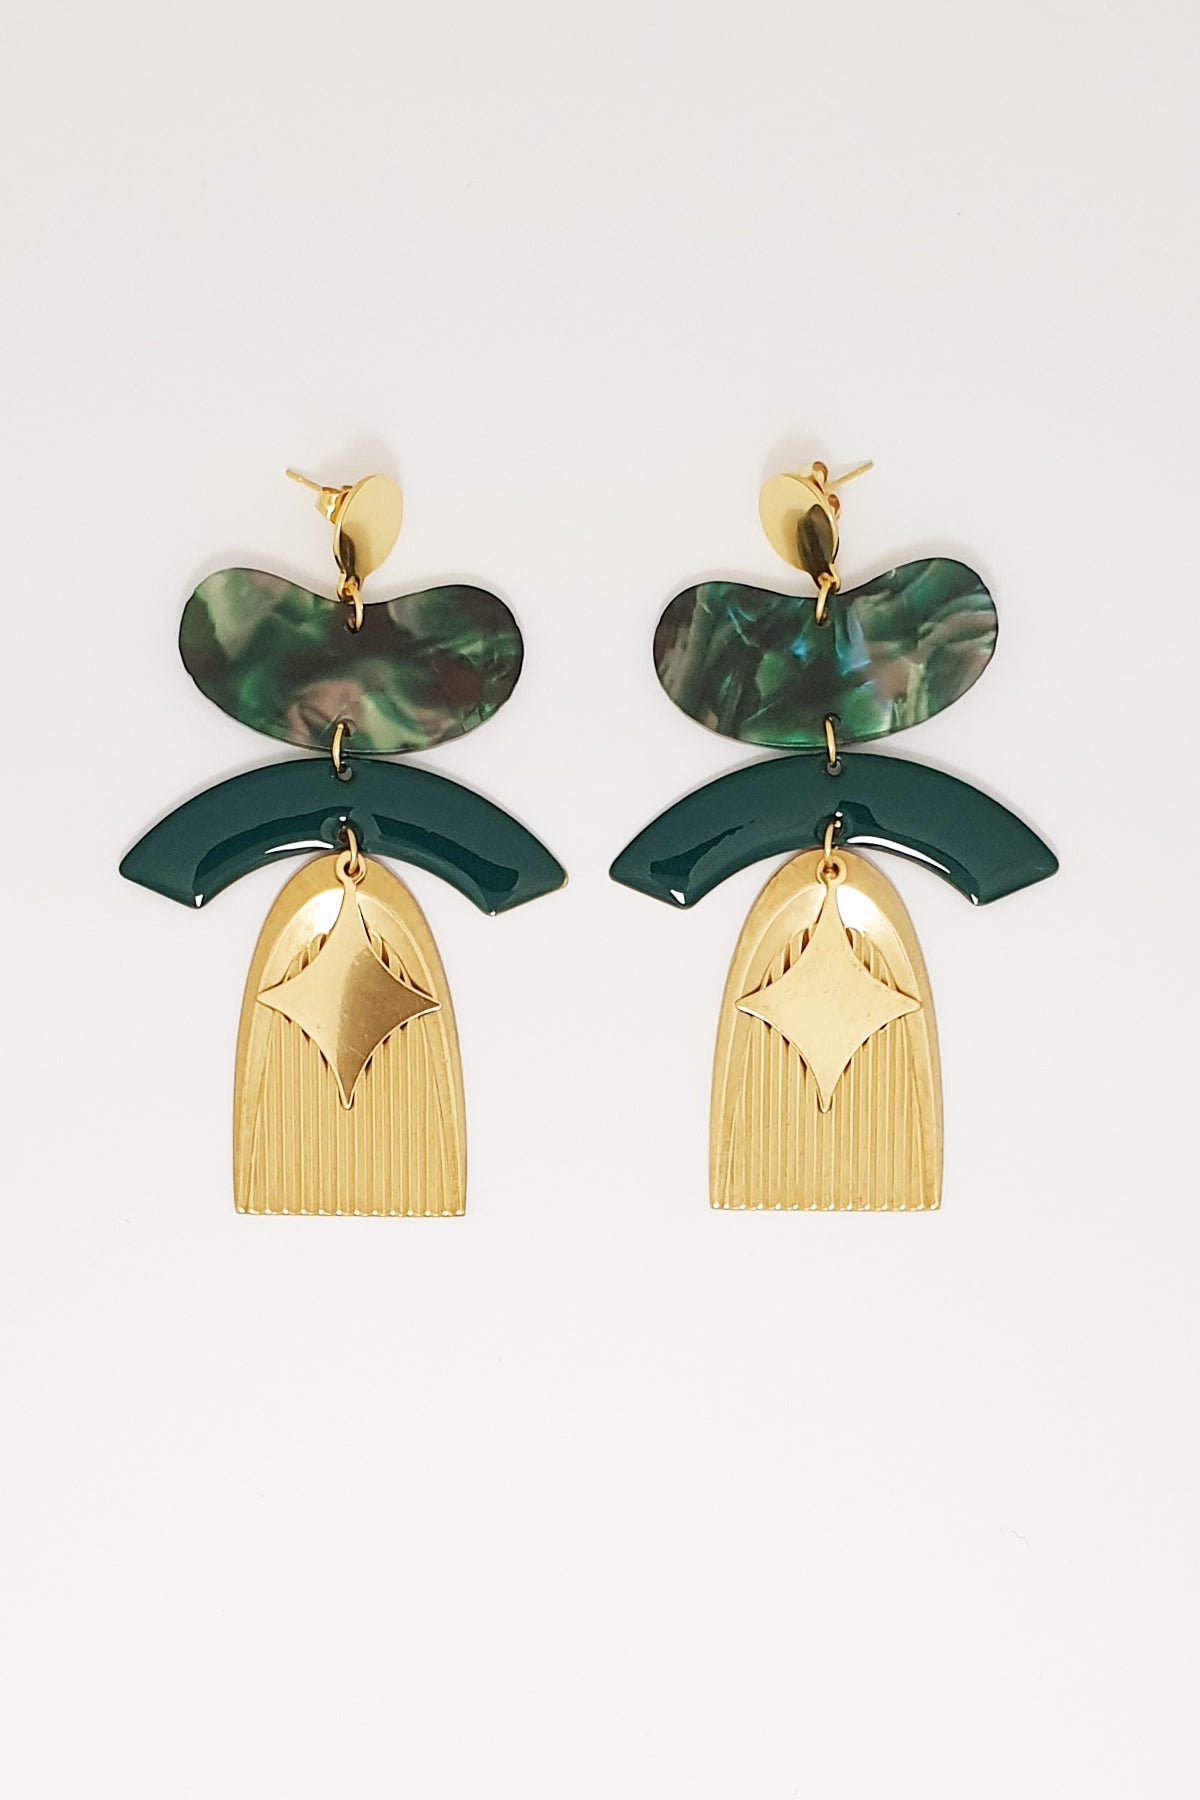 A pair of statement stud dangle earrings sit against a white background. They feature a green jellybean shaped acrylic piece, a green arch shaped enamel connector, a corrugated textured brass arch piece, and a diamond shaped brass piece.